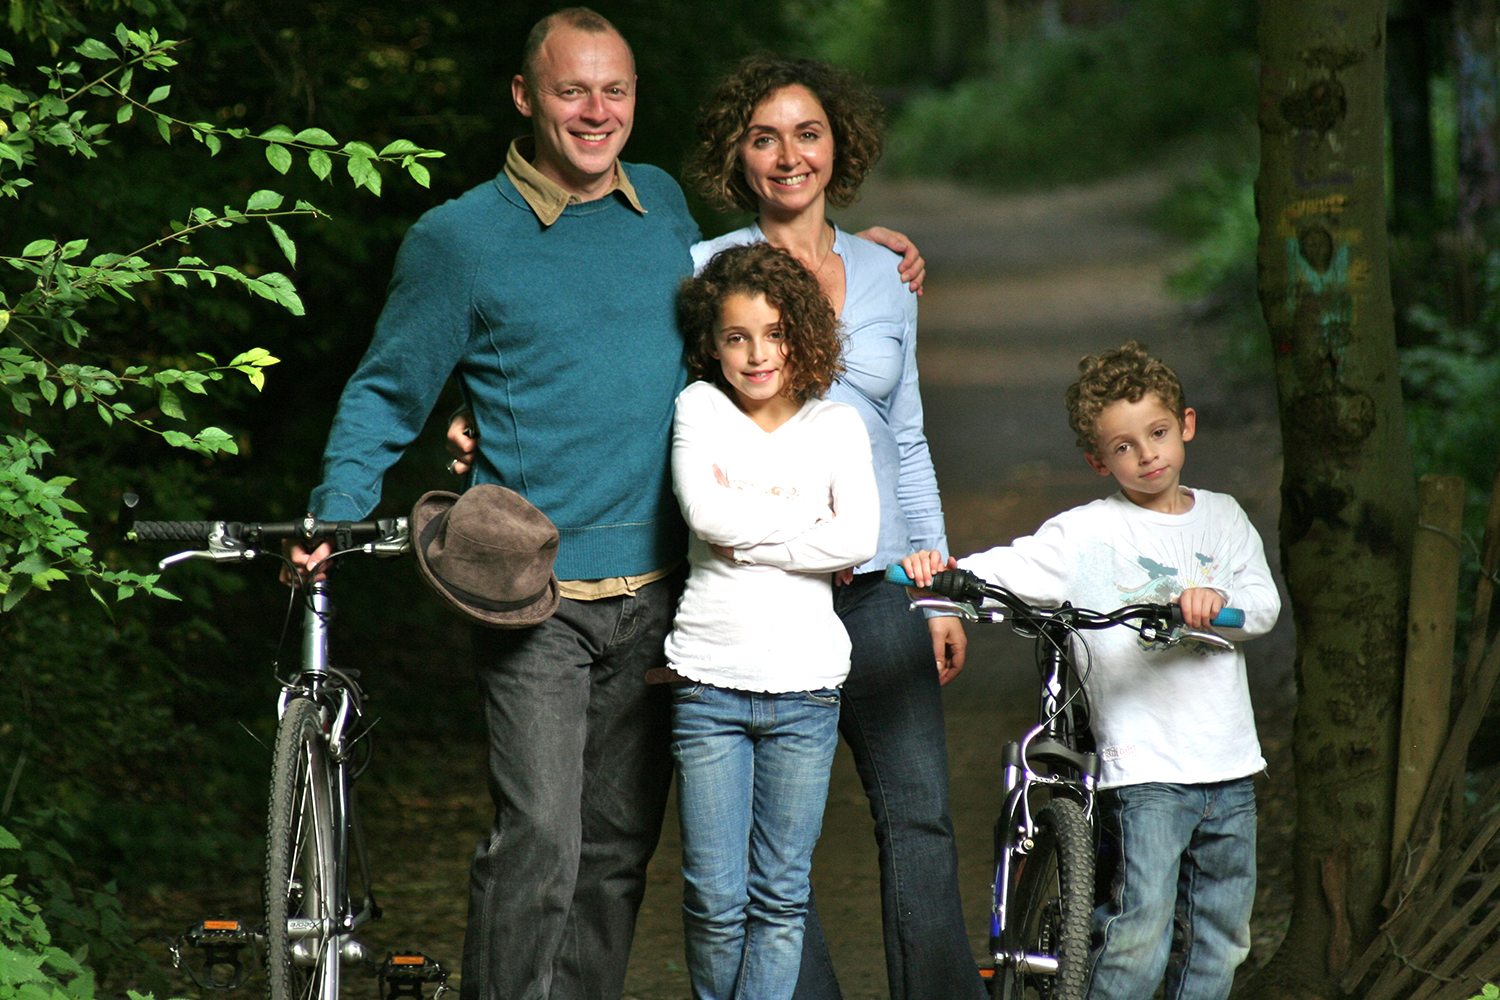 Family in the park with bikes. A brother and sister with their parents